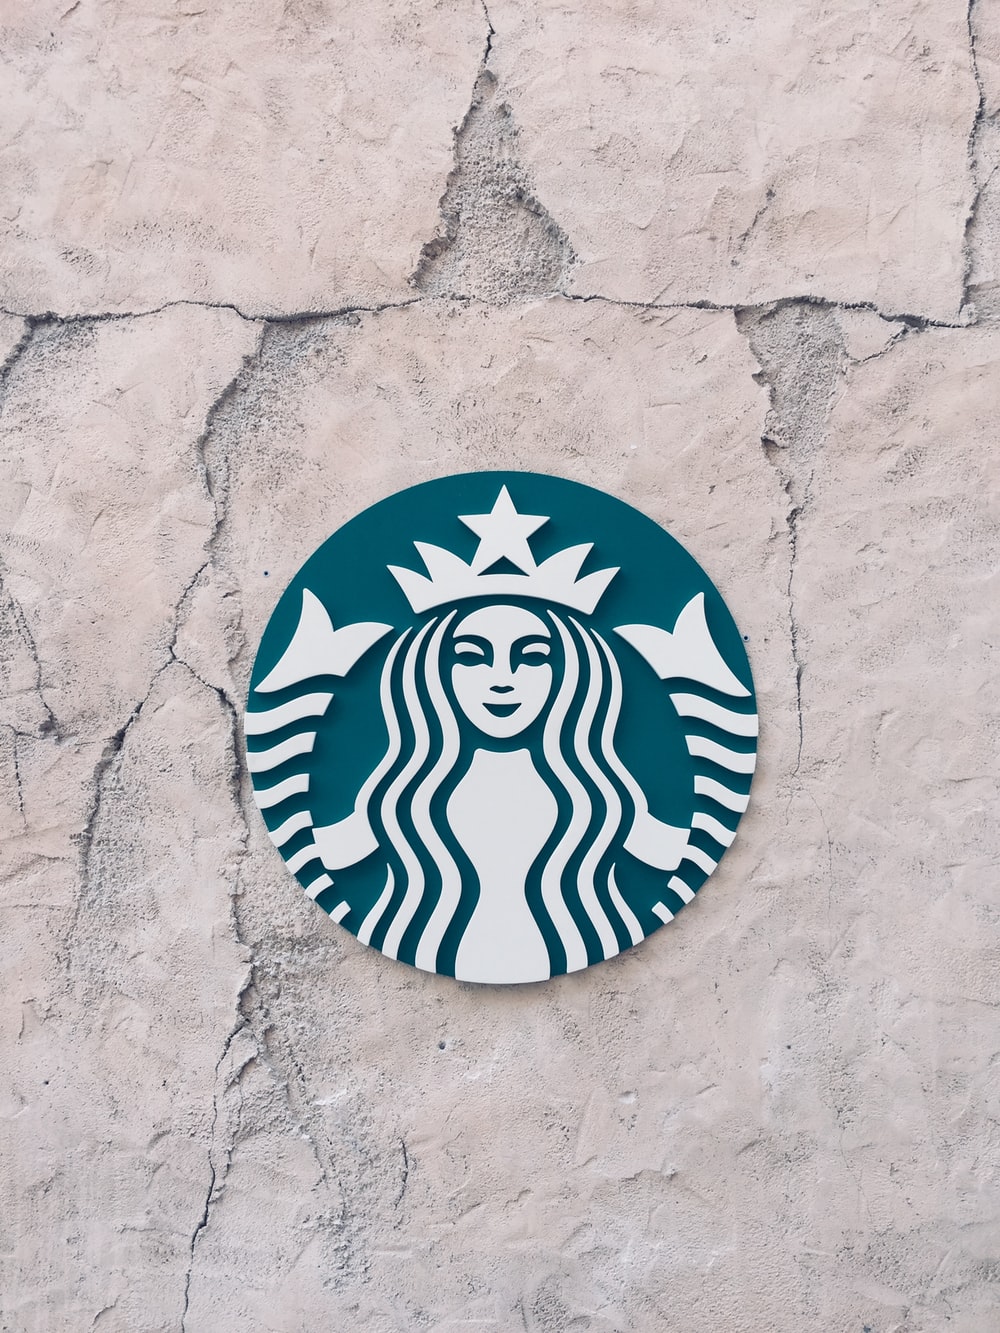 Starbucks Drink Picture. Download Free Image